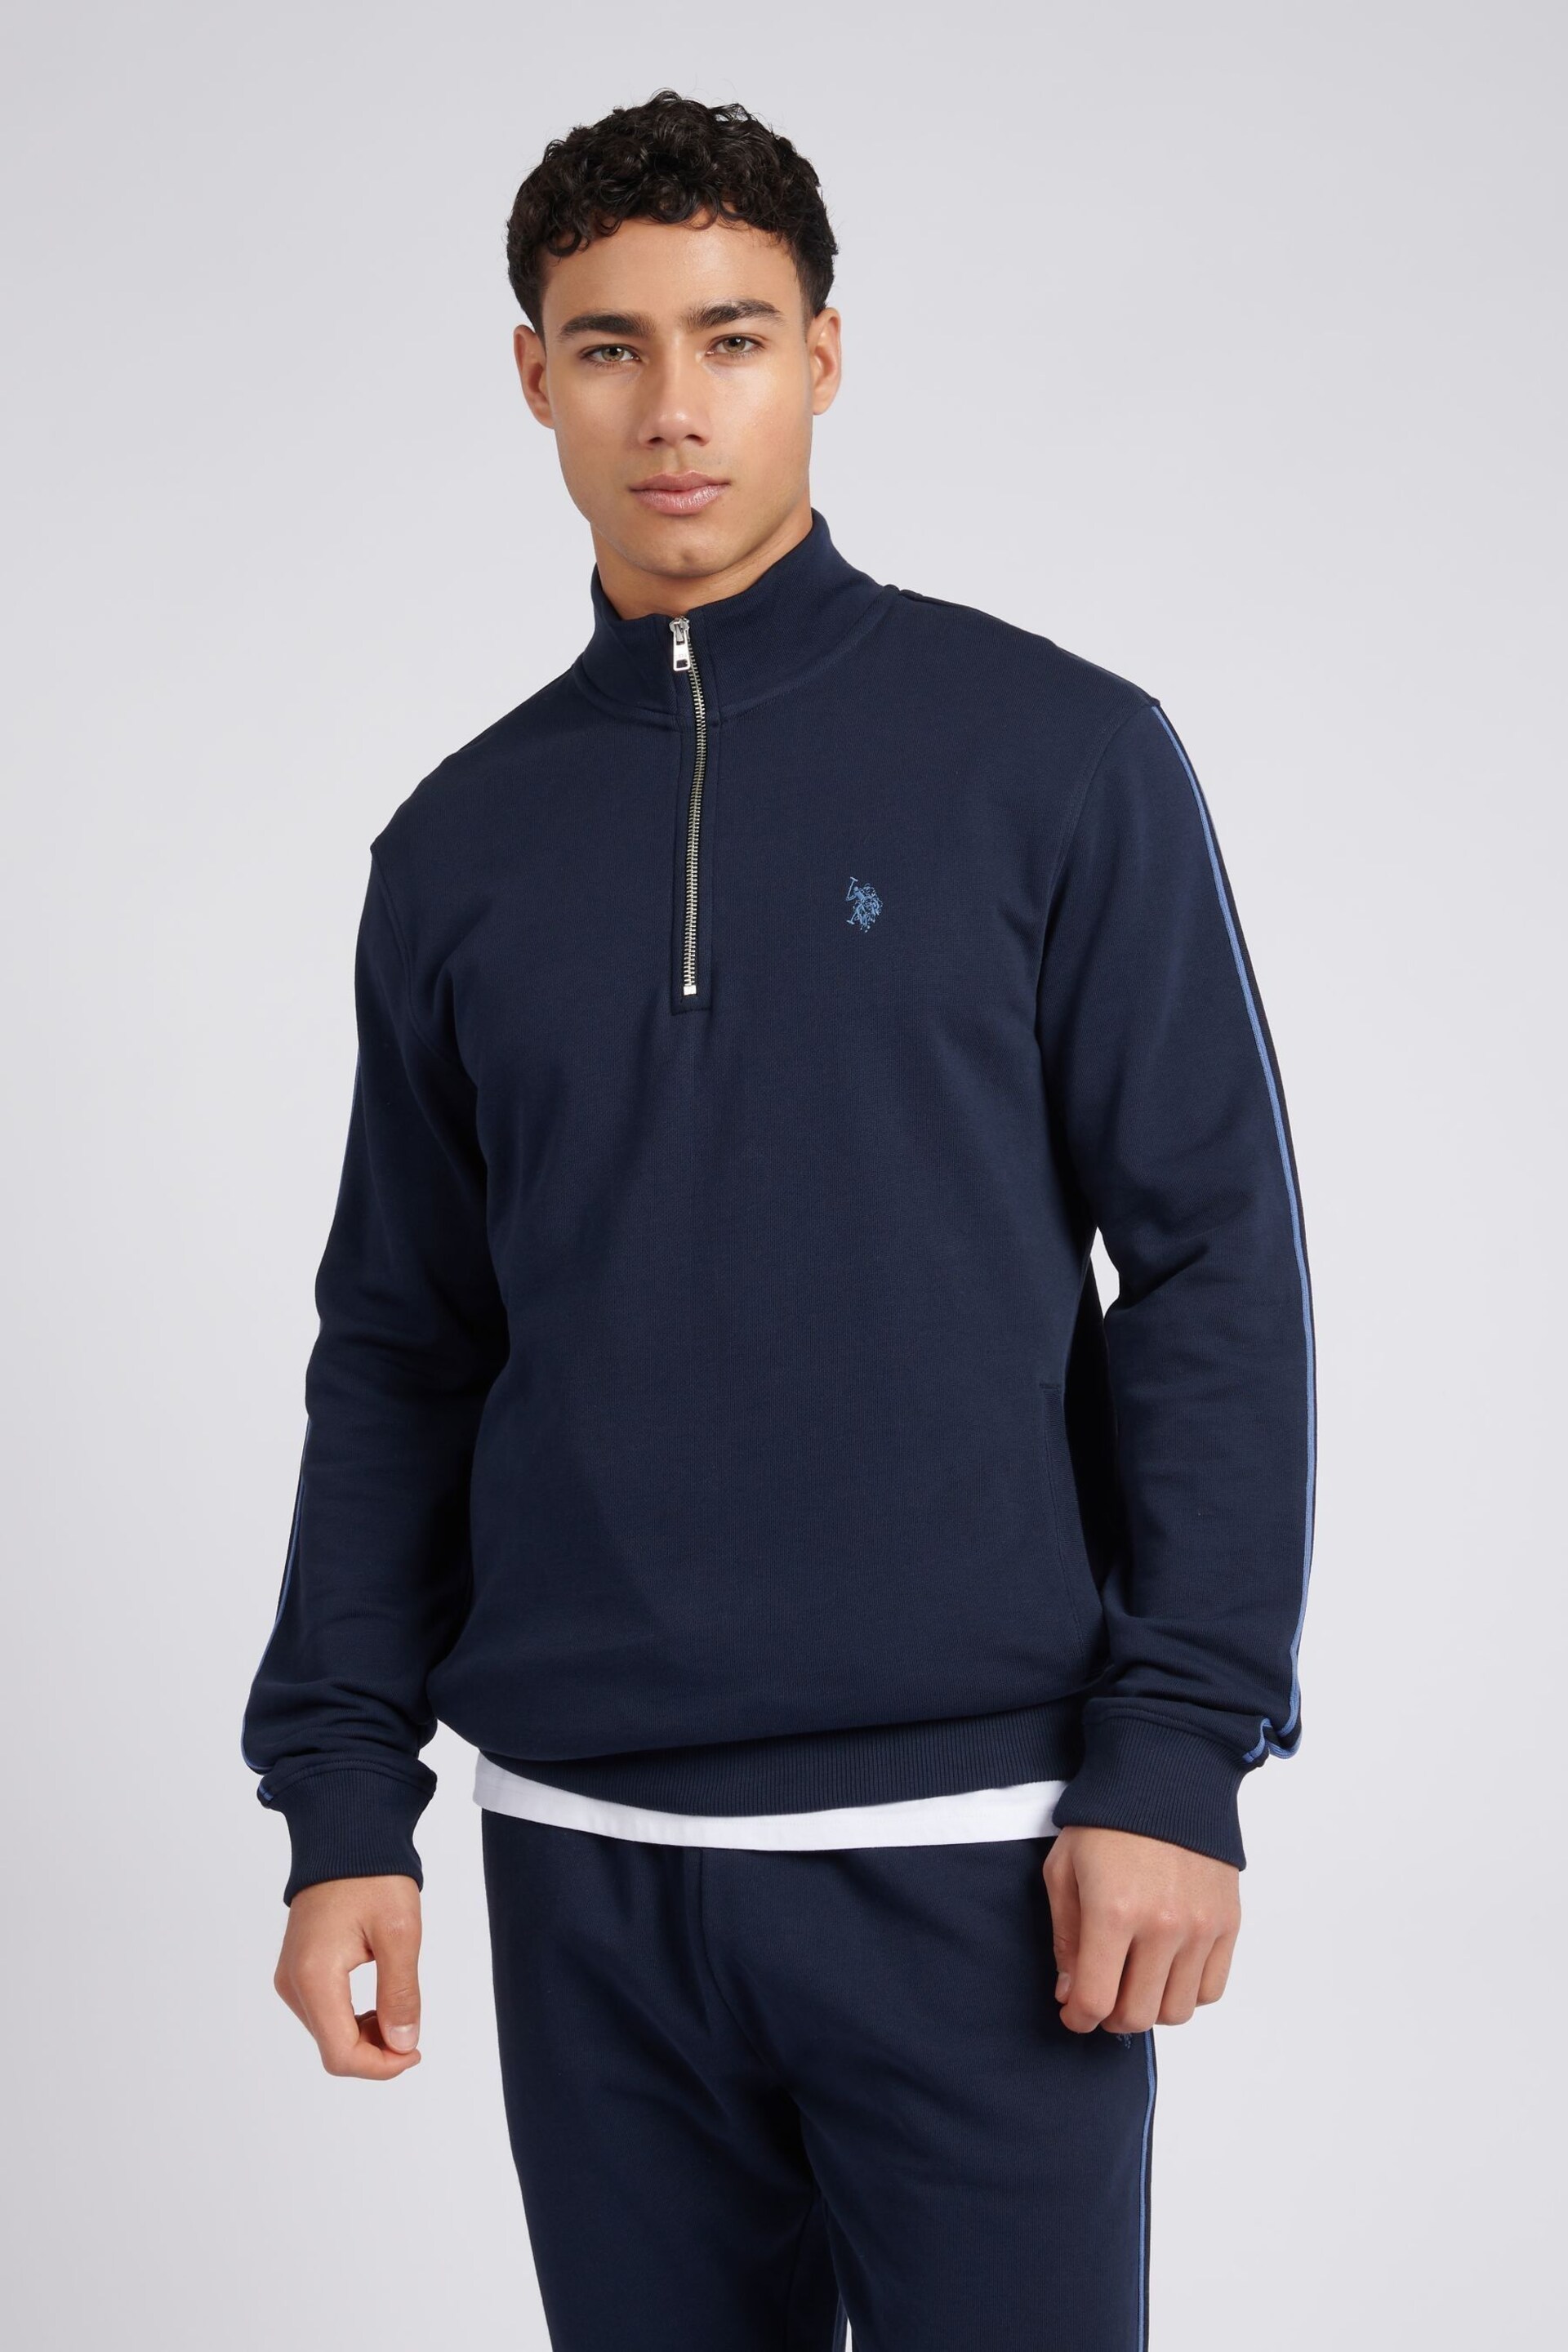 U.S. Polo Assn. Mens Blue Classic Fit Taped 1/4 Zip Sweatshirt - Image 1 of 8